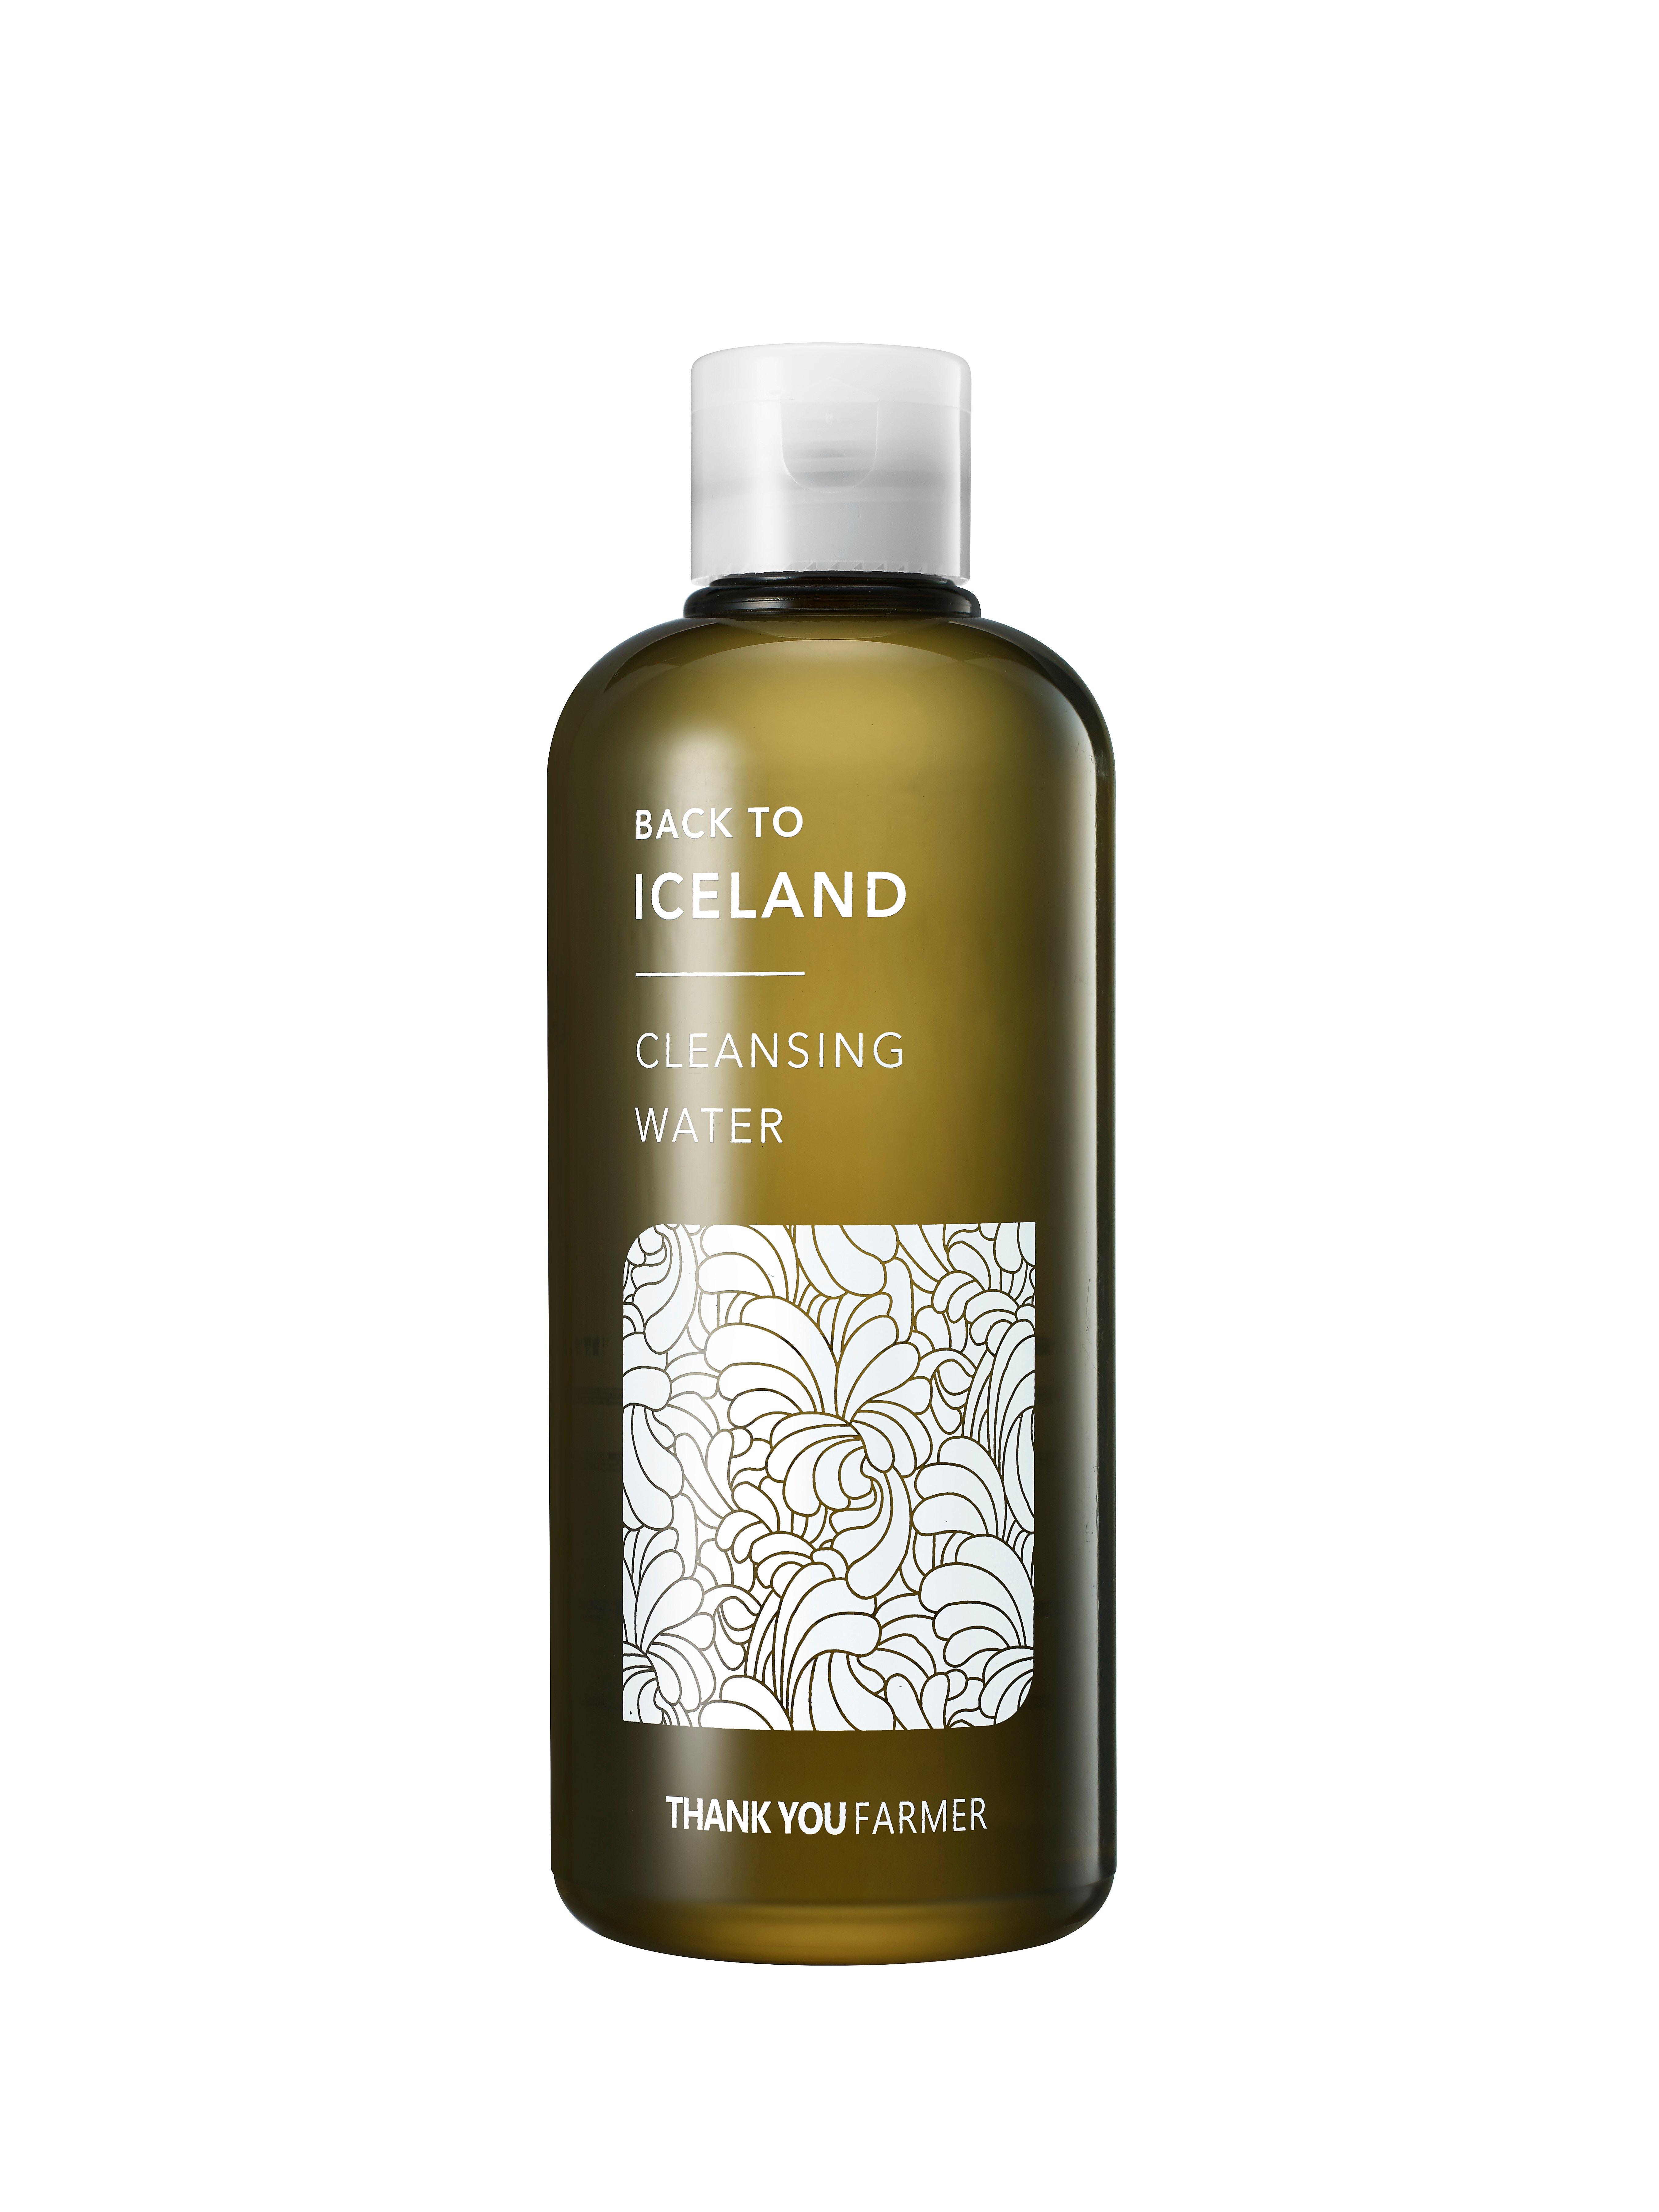 Image of THANK YOU FARMER Back to Iceland - Cleansing Water - 260ml